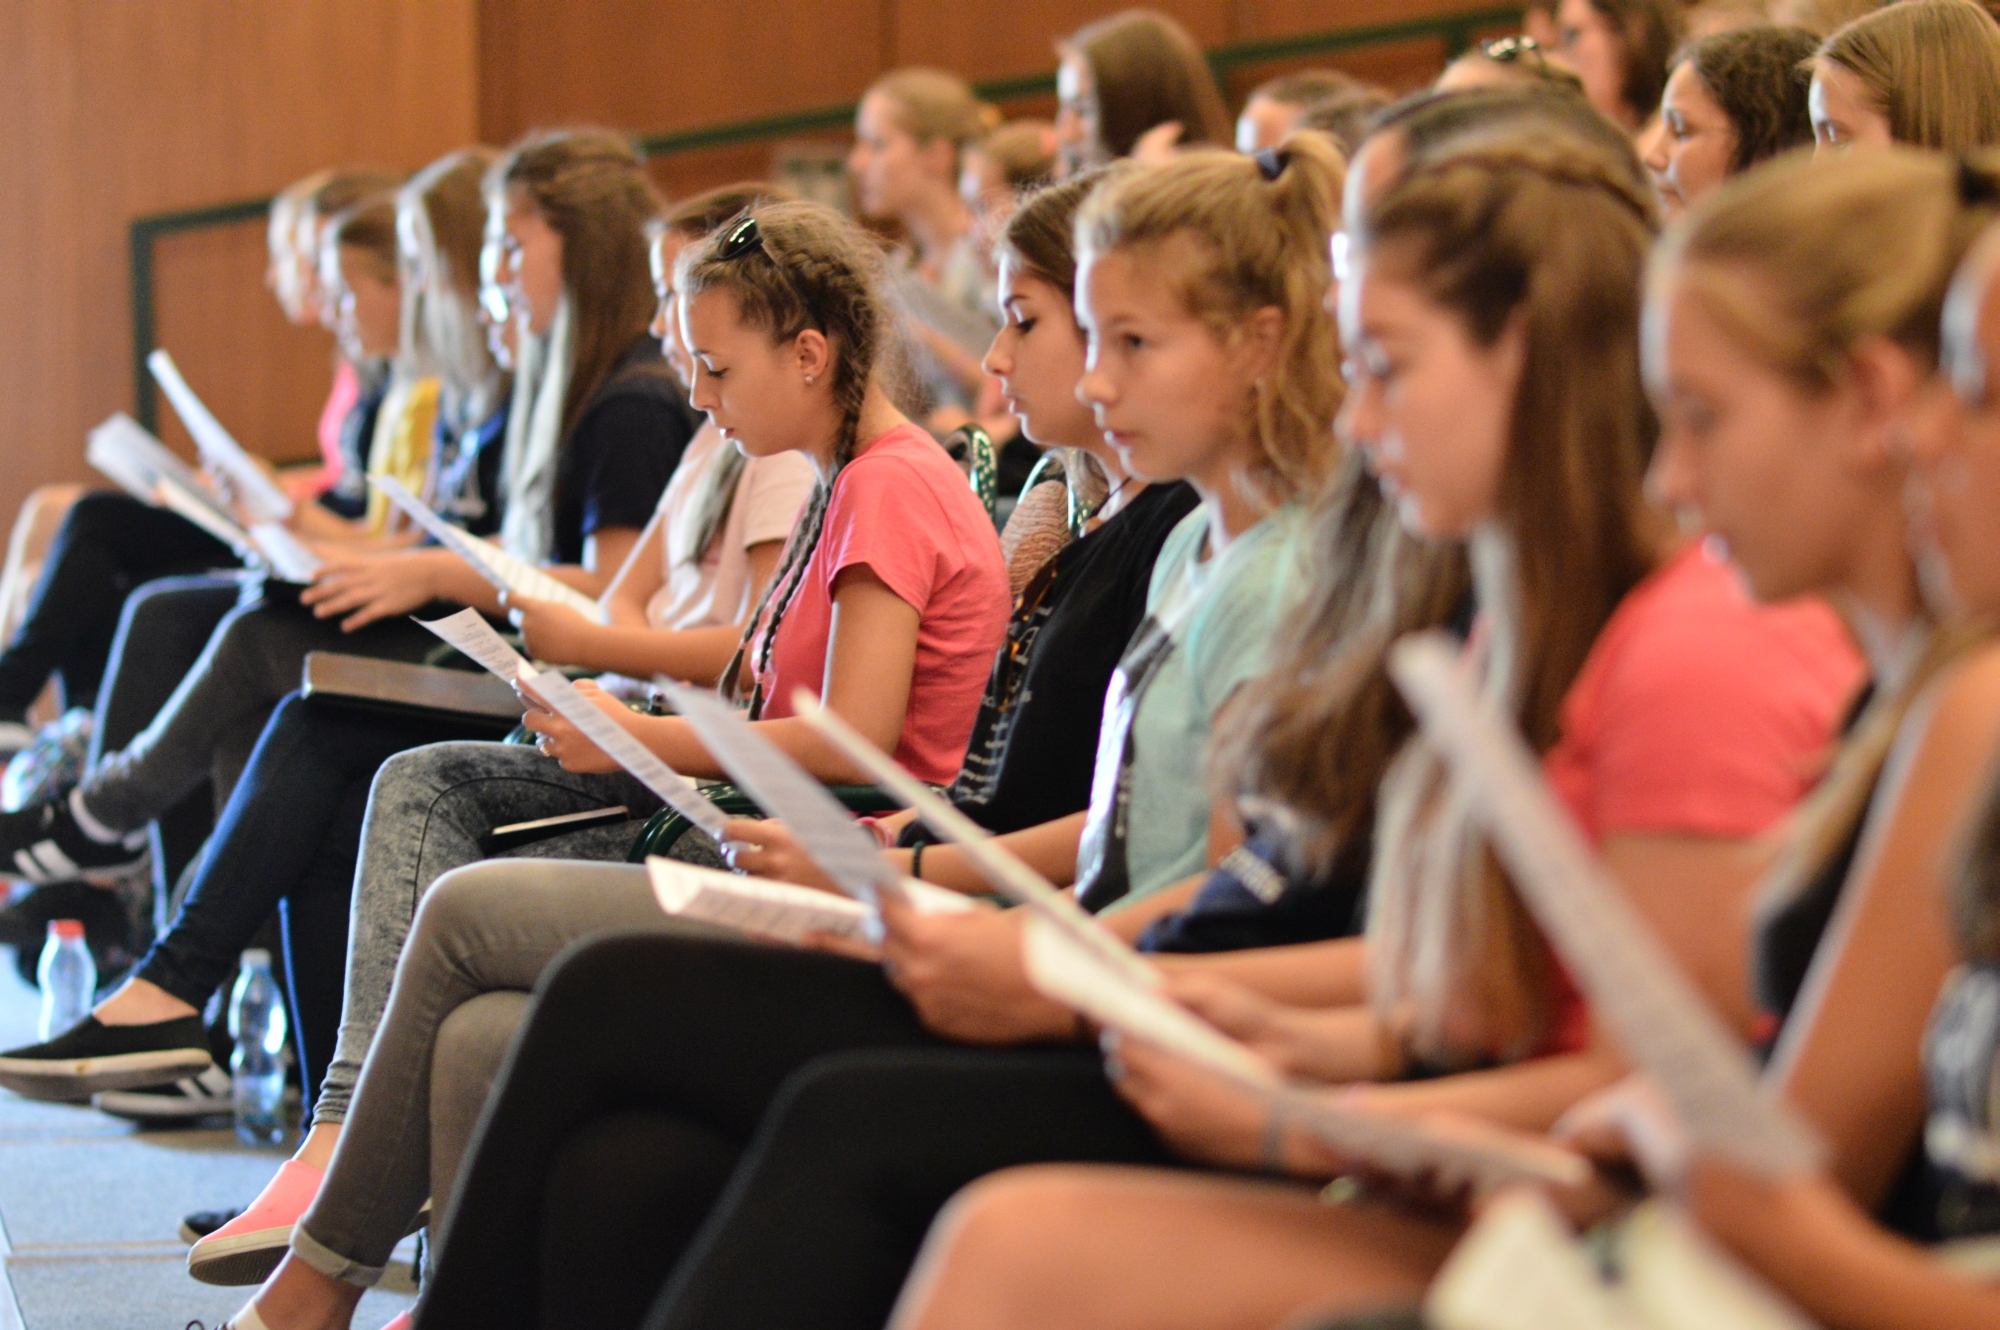 Life satisfaction in a girls’ choir